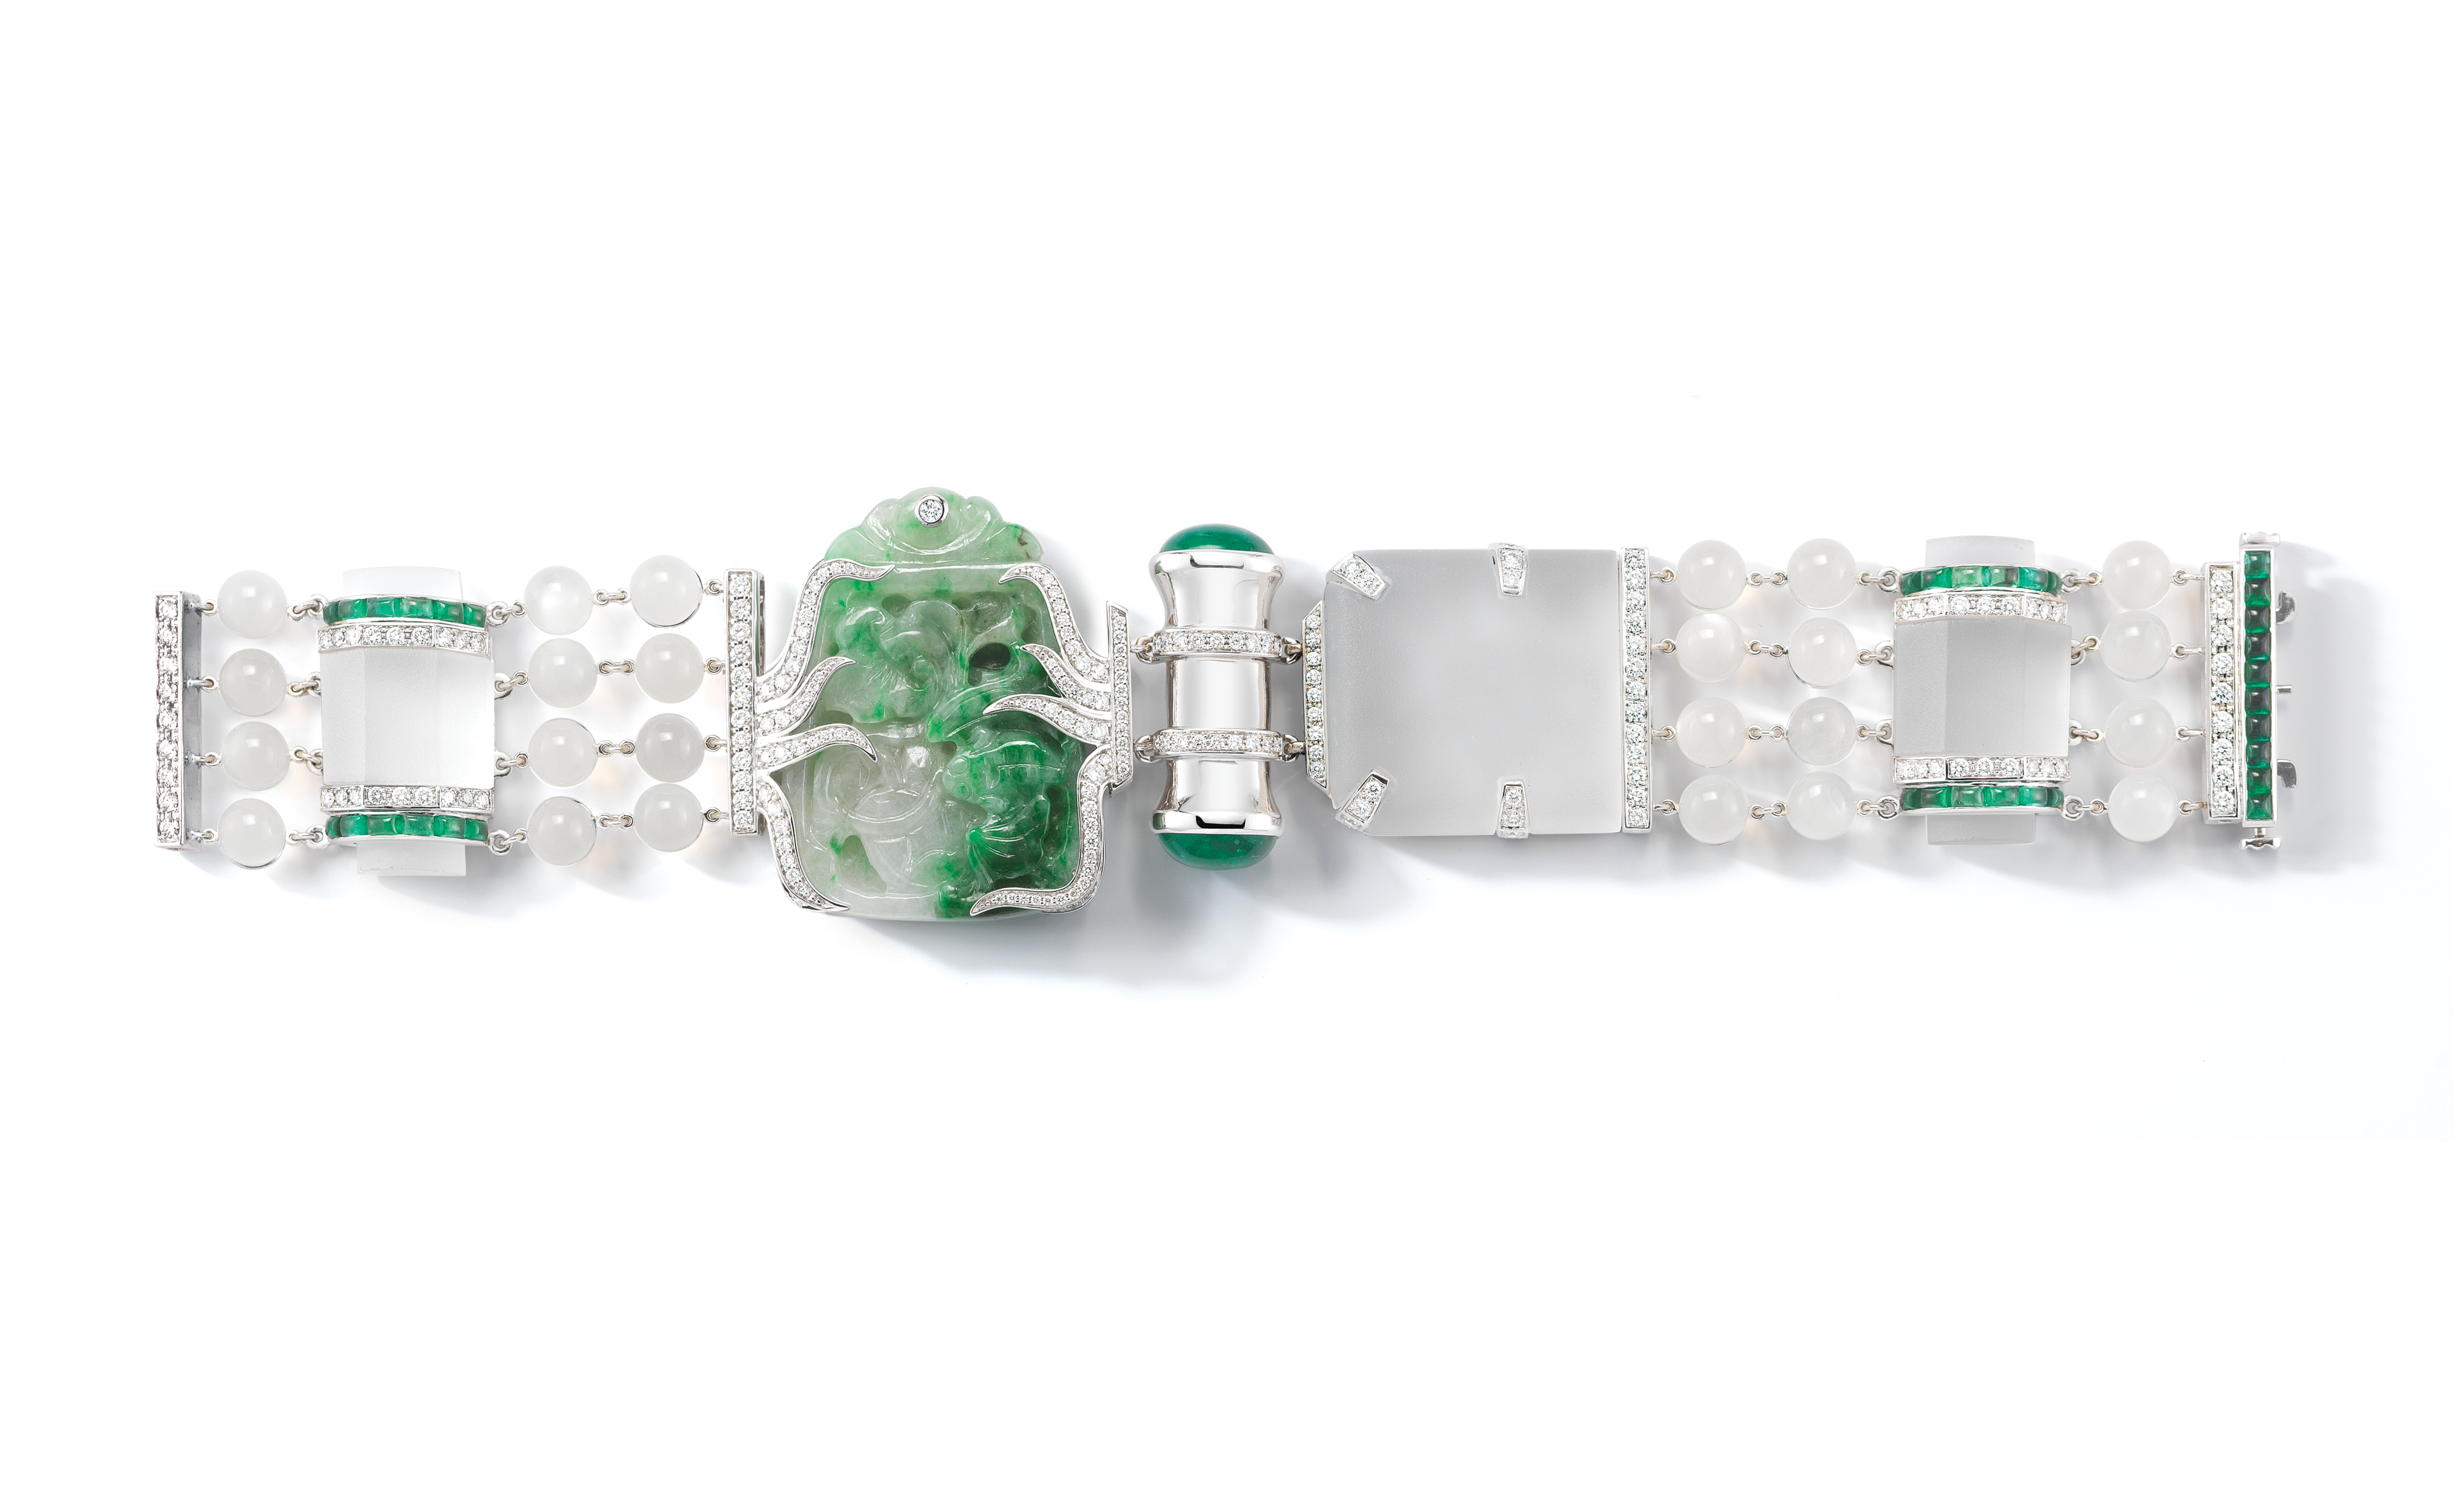 A Carved Jade, White Quartz and Moonstone Bead Bracelet with Emerald & Diamond Accents Set In 18K White Gold. Signed Seaman Schepps.